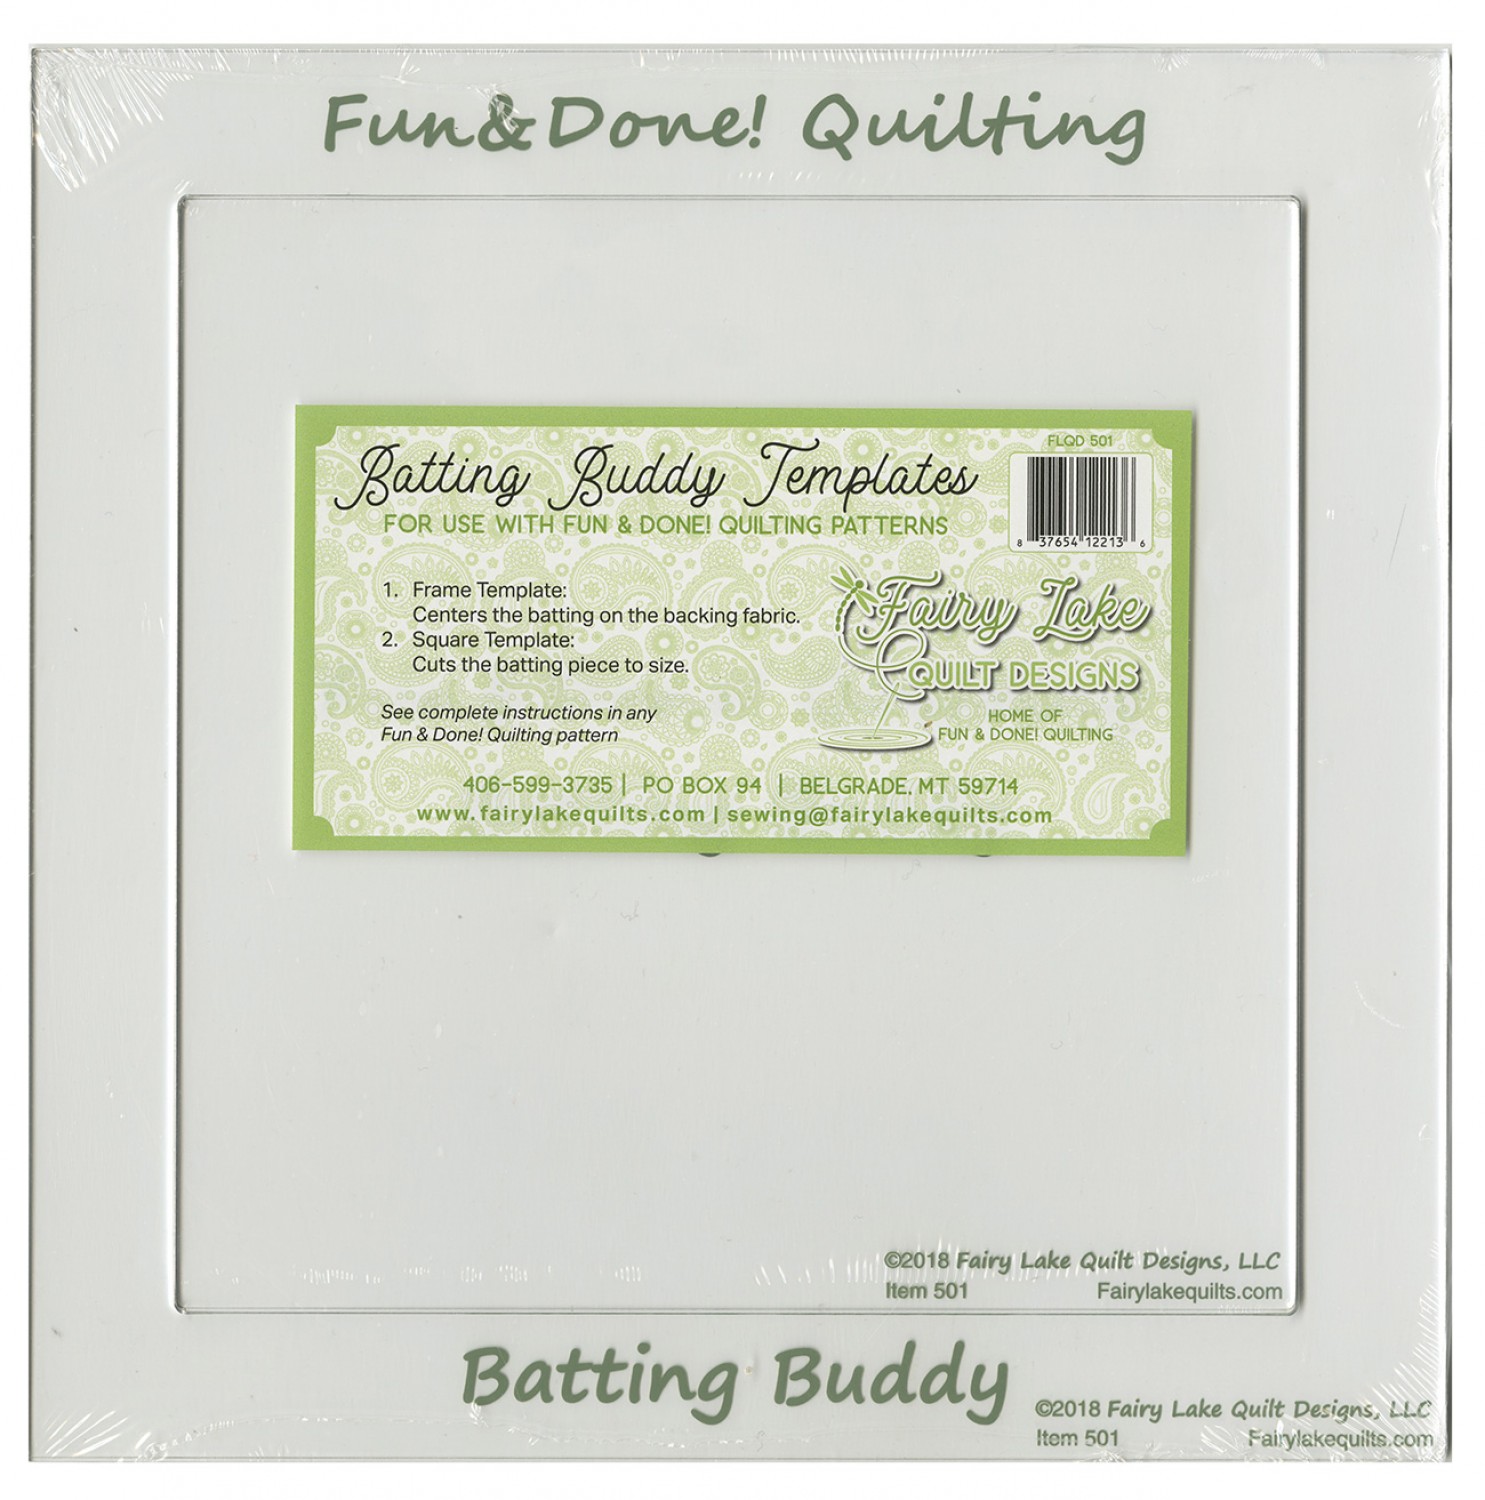 Batting Buddy Template - Fun and Done